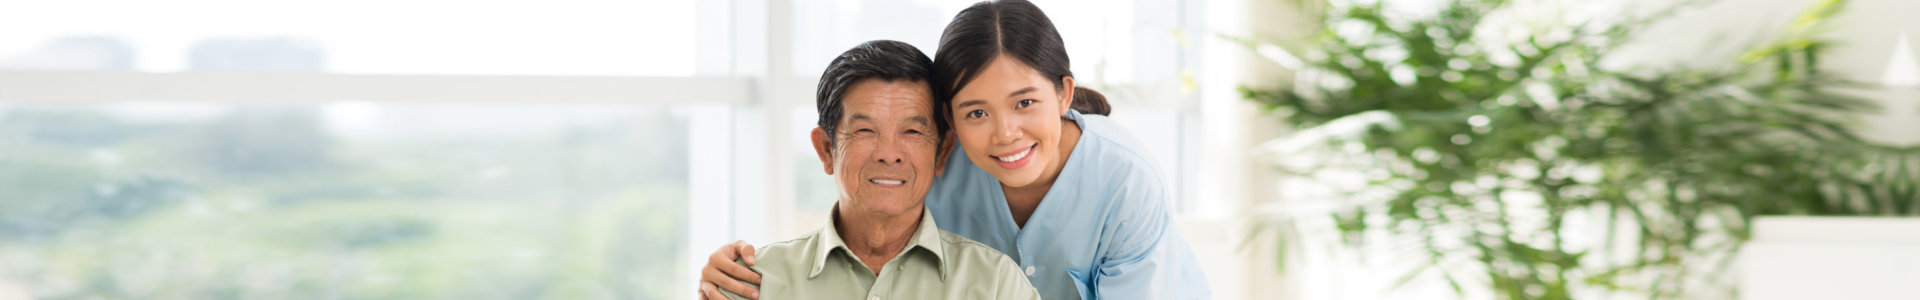 medical staff and eldery person smiling